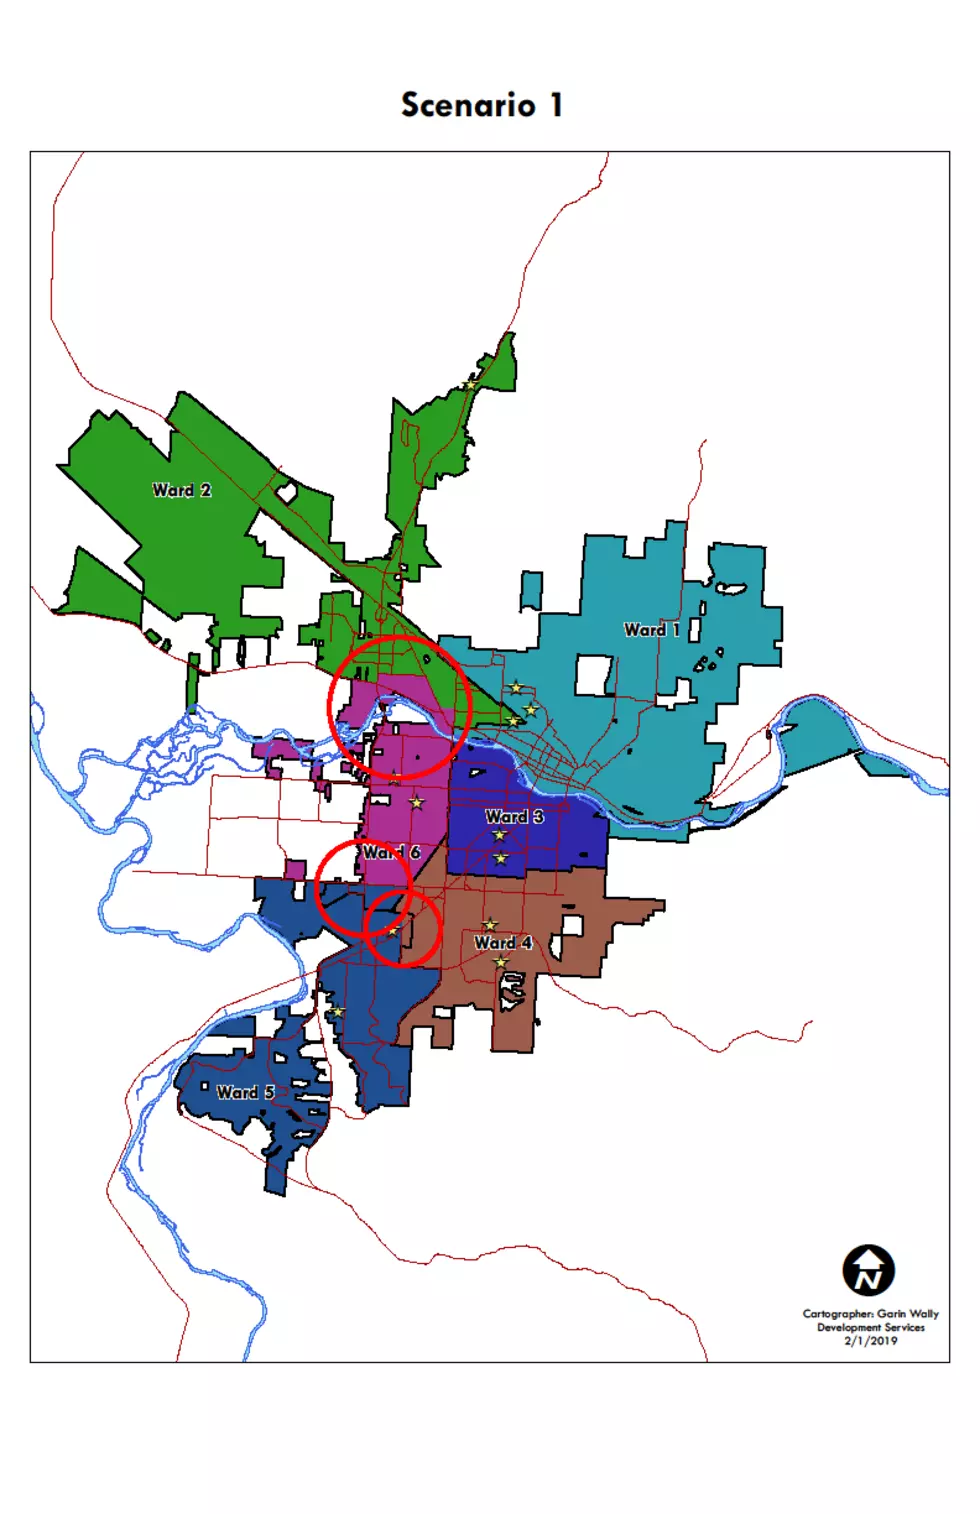 Missoula City Council approves new ward boundaries for 2019 election